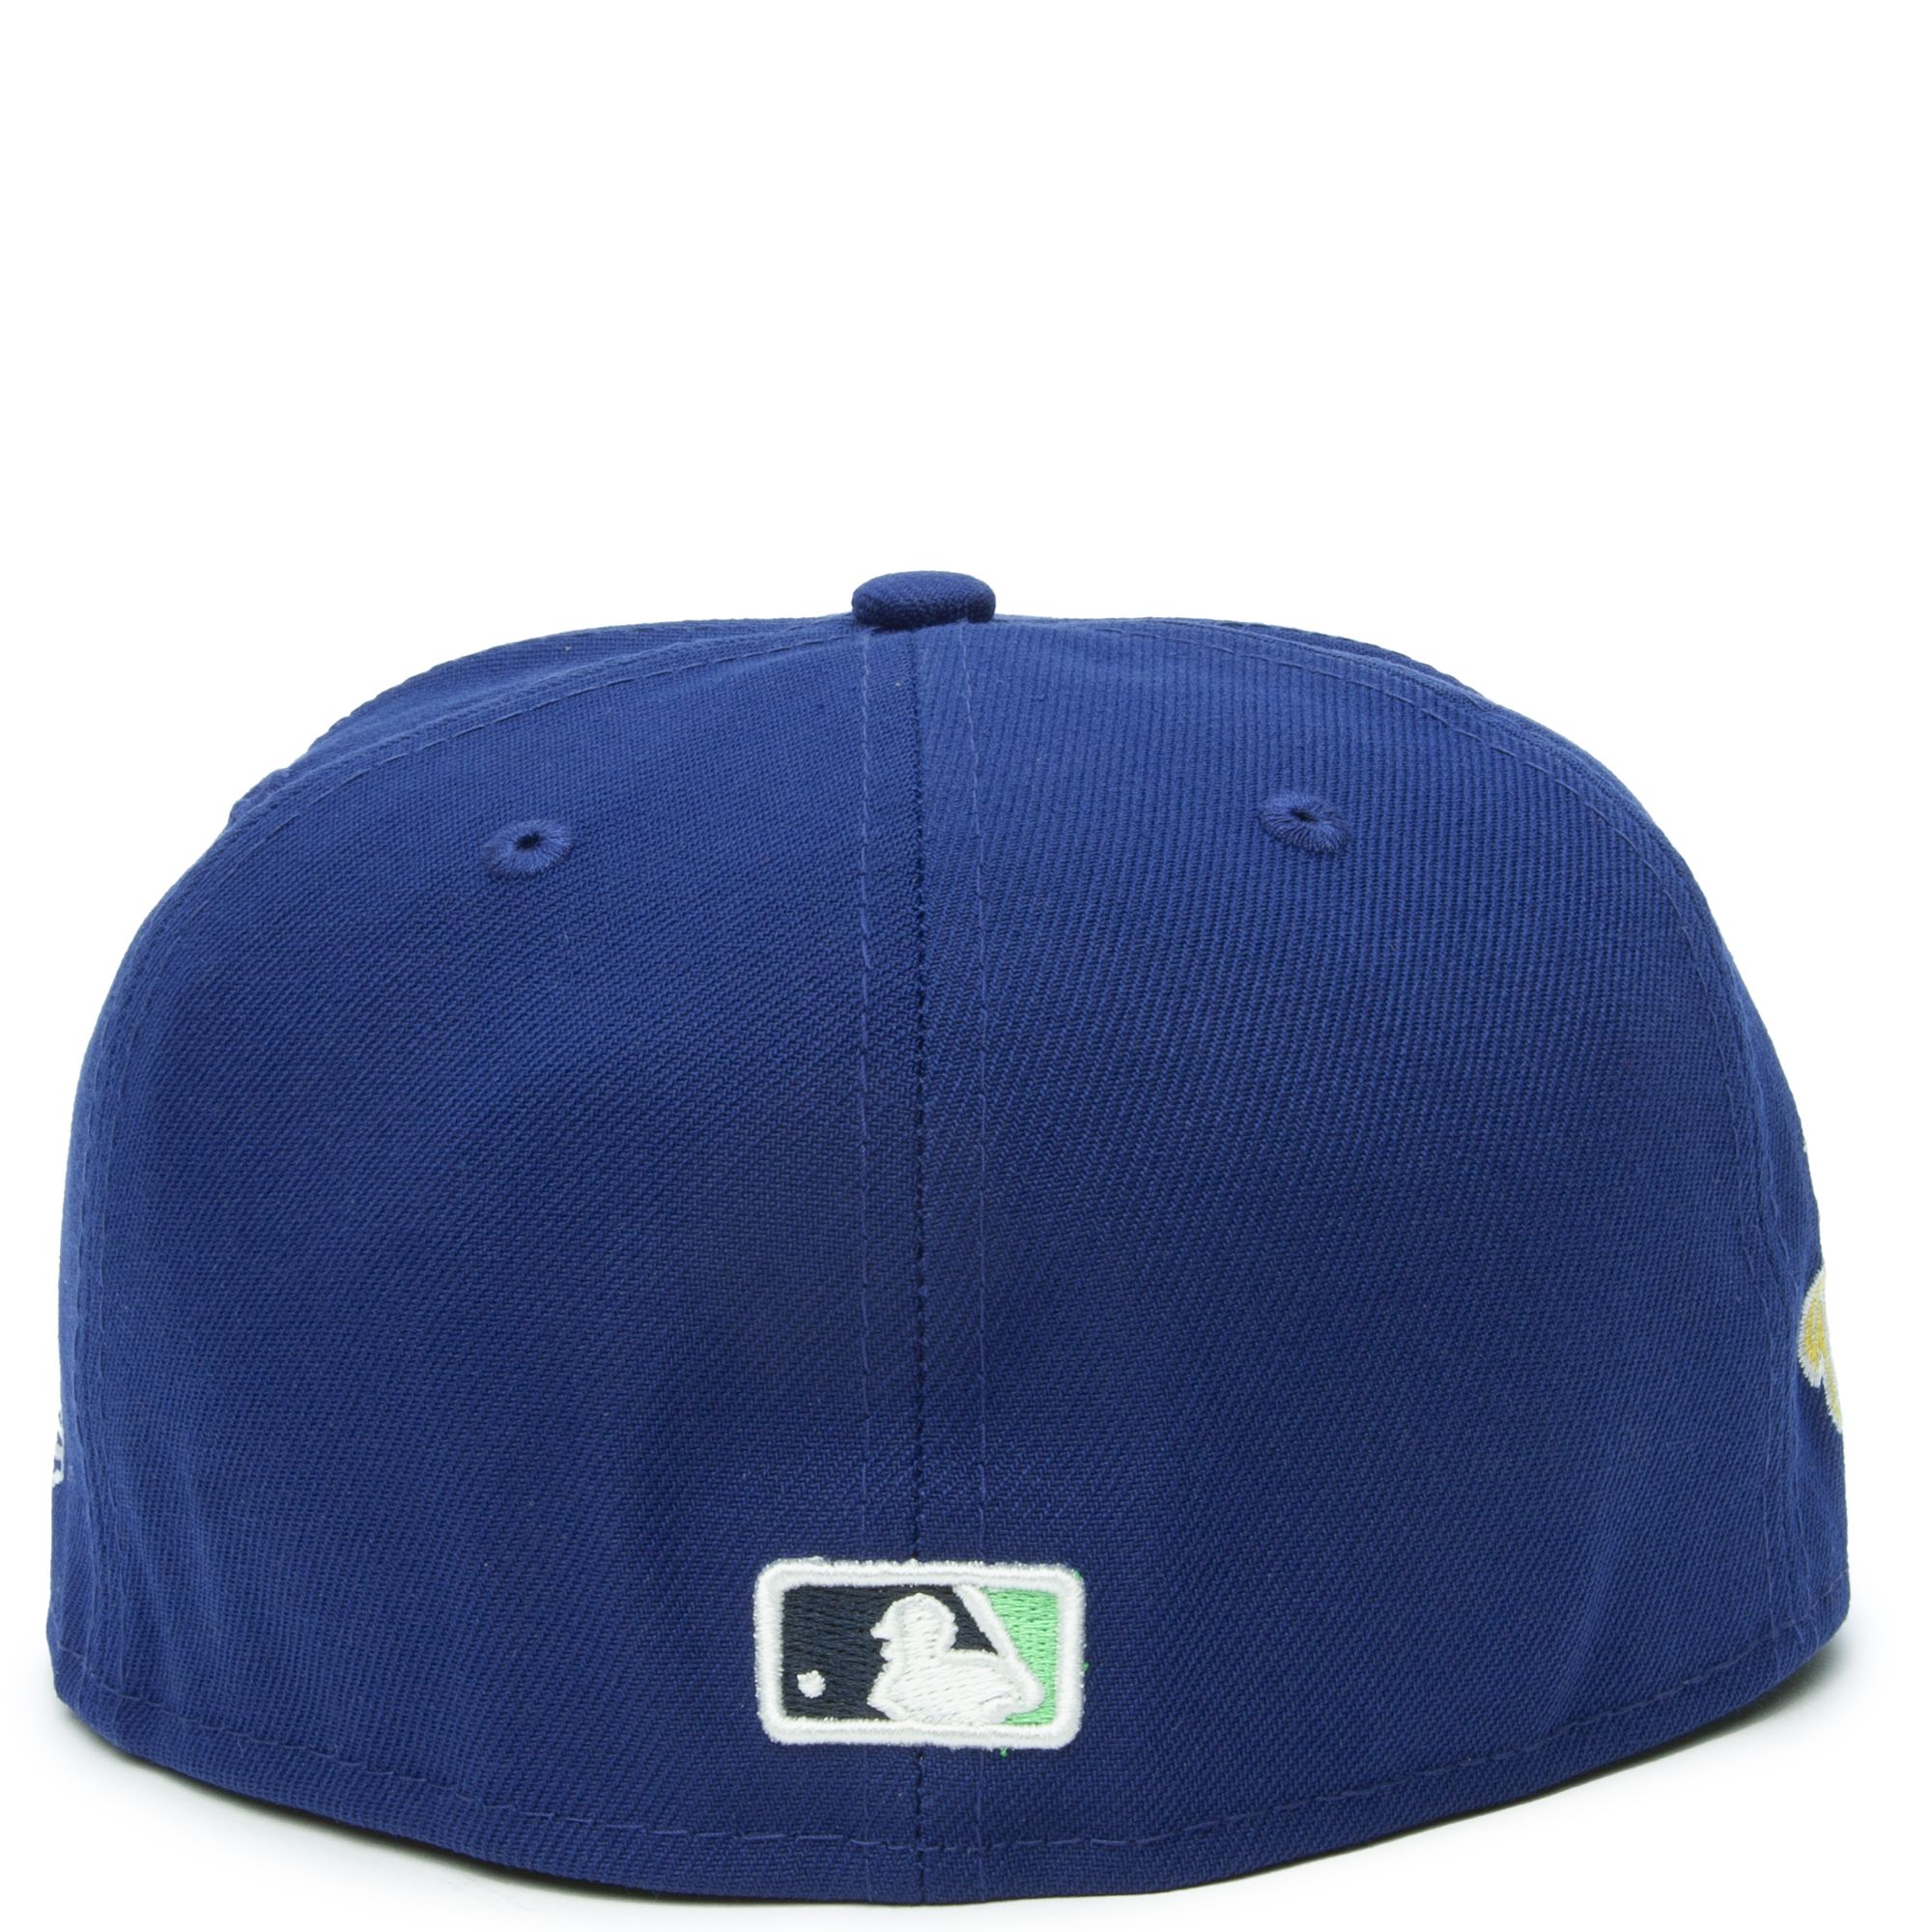 New York Yankees New Era Fashion Color Basic 59FIFTY Fitted Hat - Blue